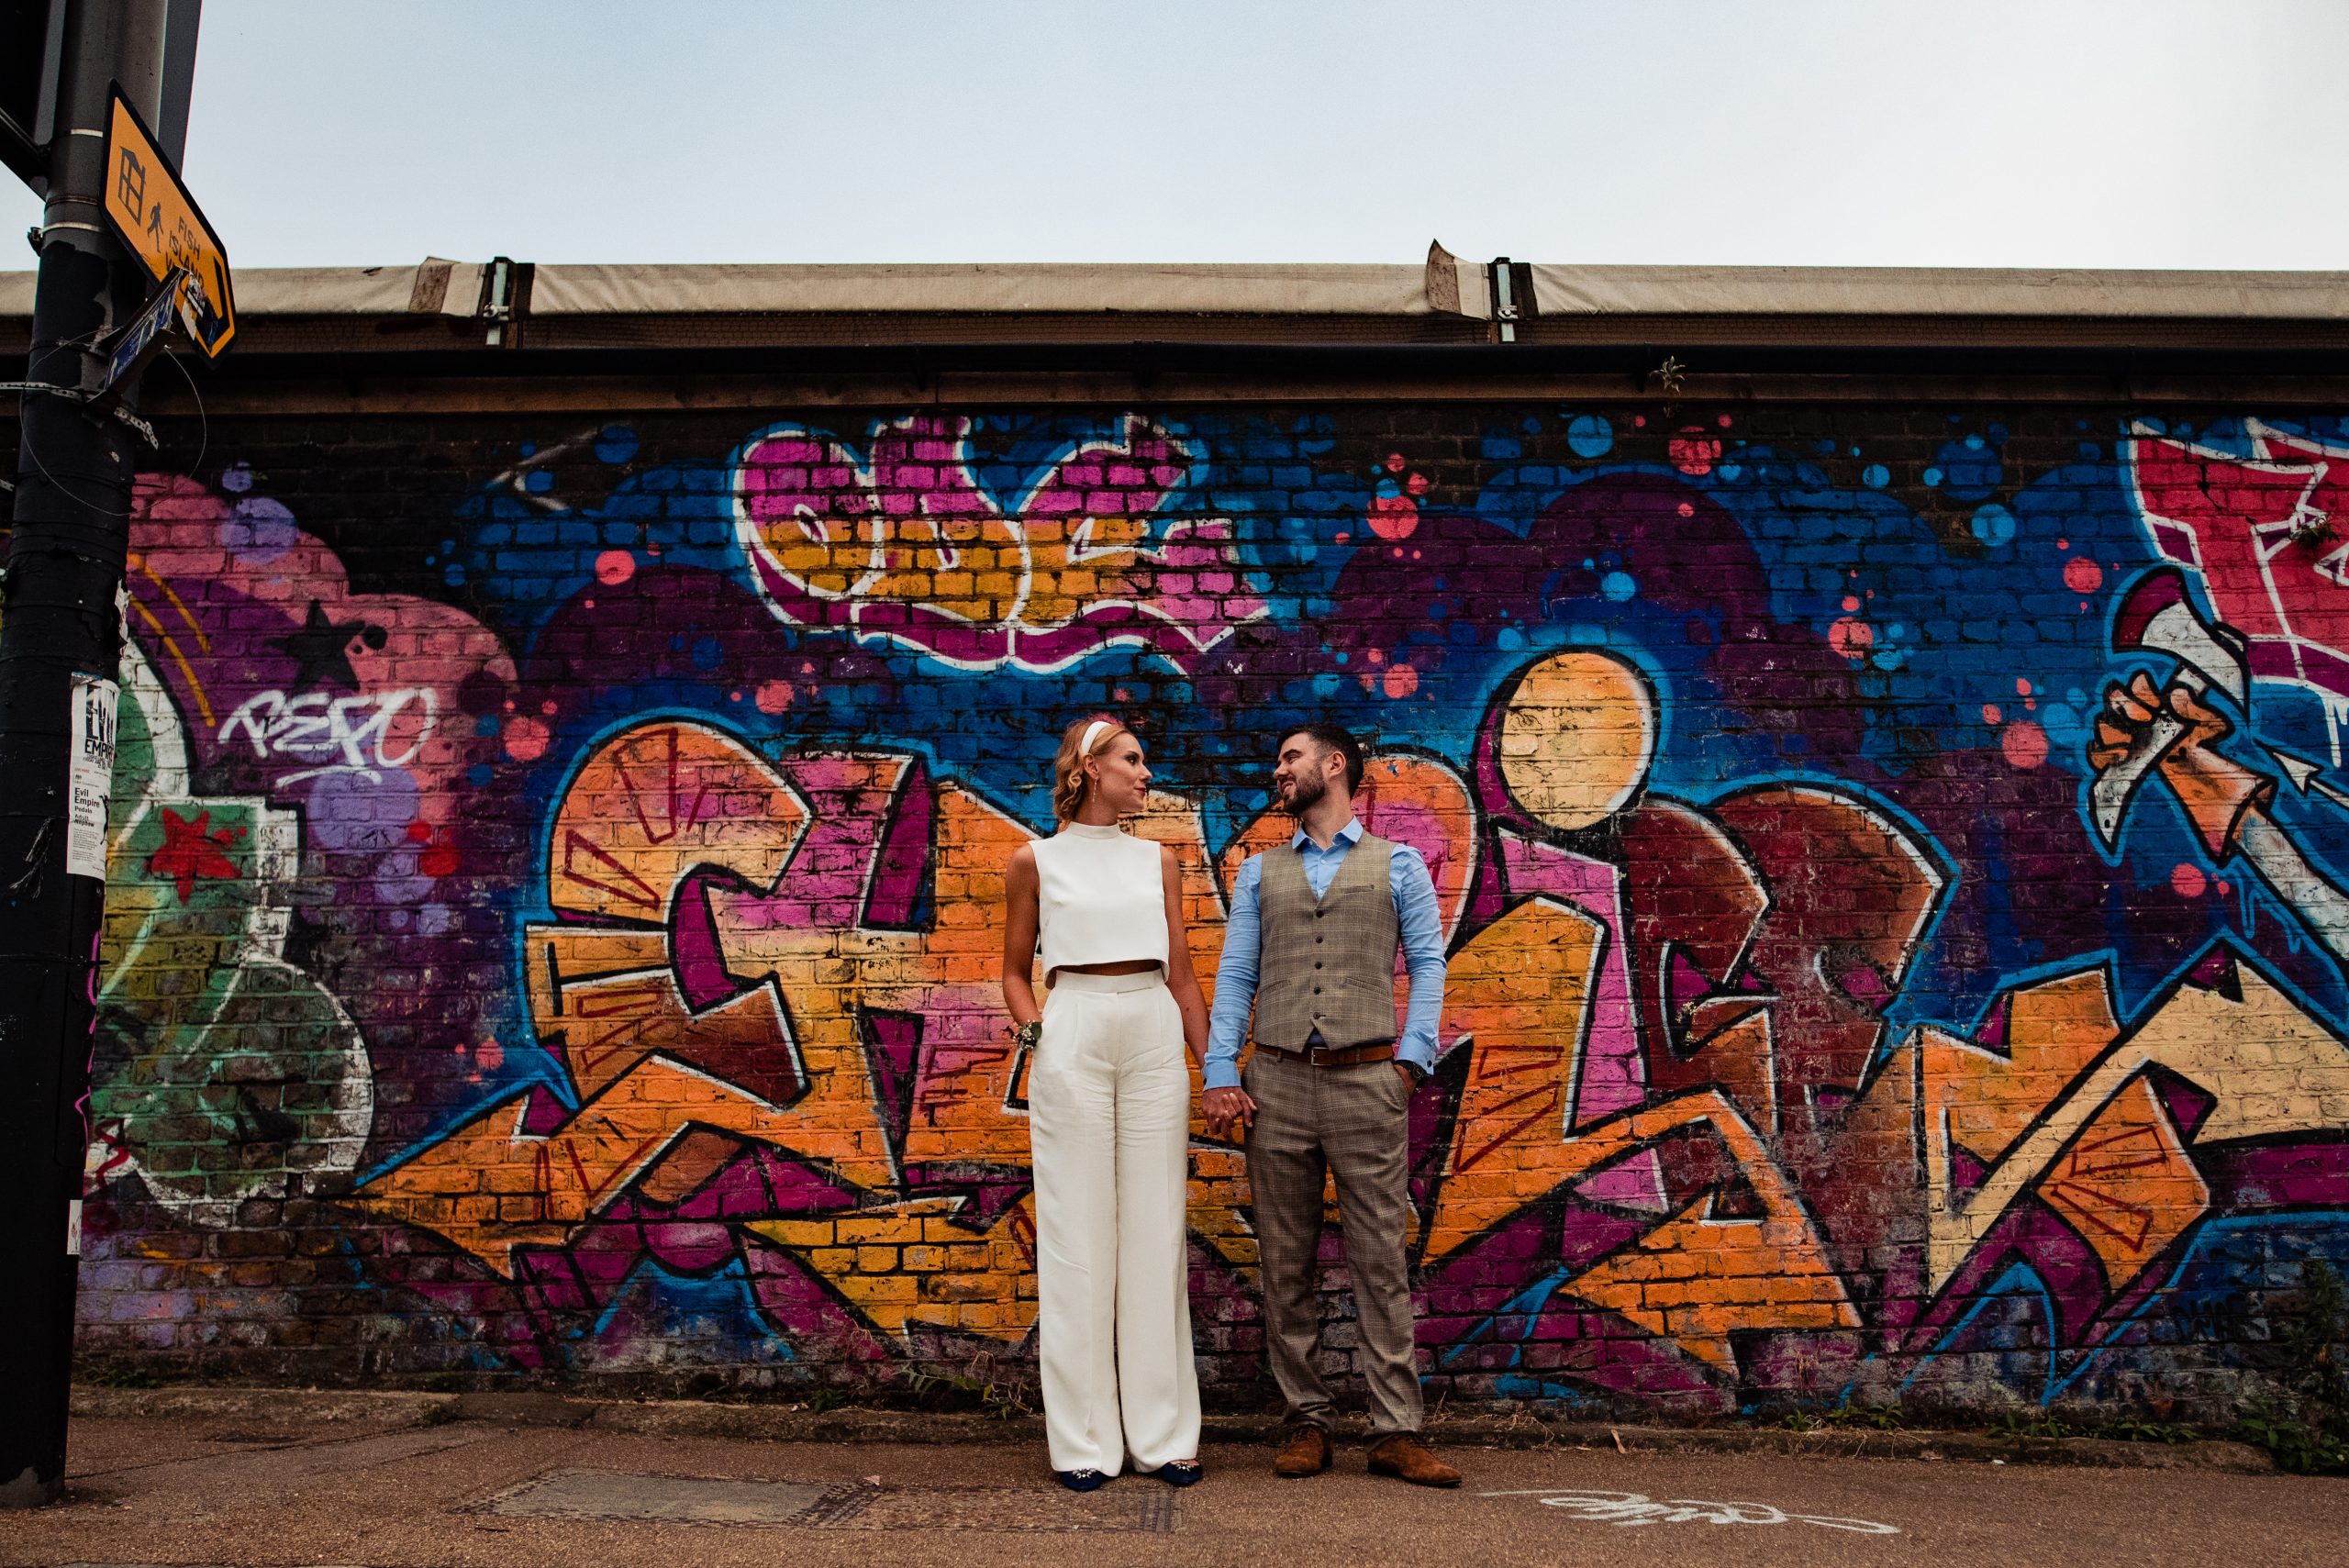 White Bride & groom standing in front of a graffiti wall mural, the bride is wearing a Dara Ford cropped blouse and trousers